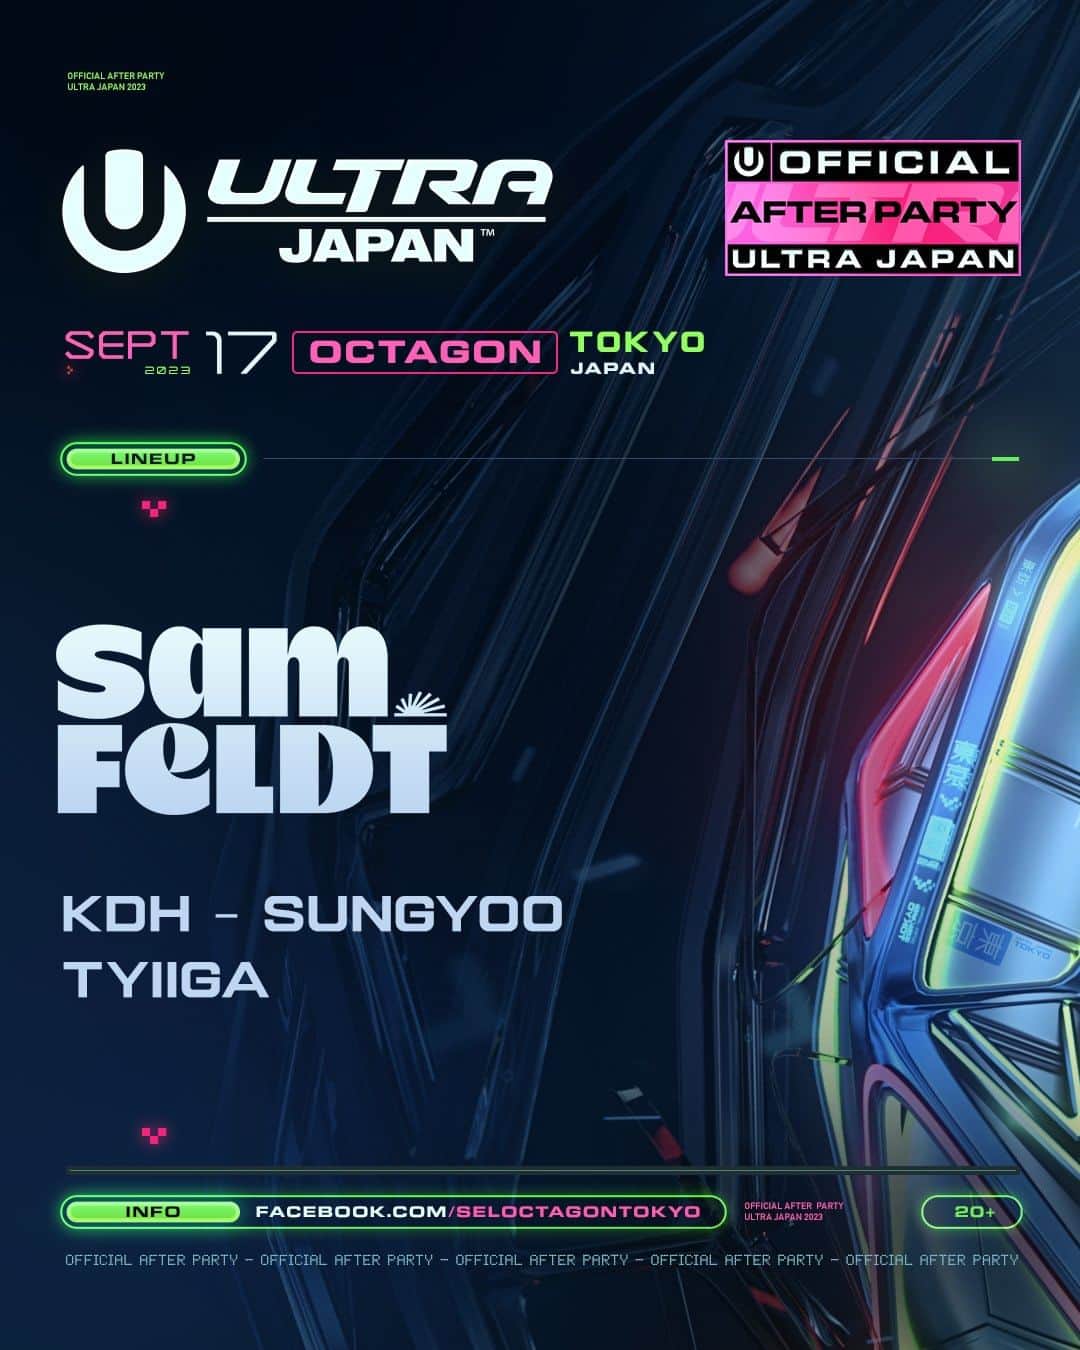 Ultra Japanのインスタグラム：「ULTRA JAPAN 2023をまだまだ楽しみたいあなたに。  オフィシャルアフターパーティーの詳細はこちら。  For those of you who still want to enjoy ULTRA JAPAN 2023.  Here for details on the official afterparty.  @samfeldt  #ultrajapan #ultrajapan2023 #ウルトラジャパン」